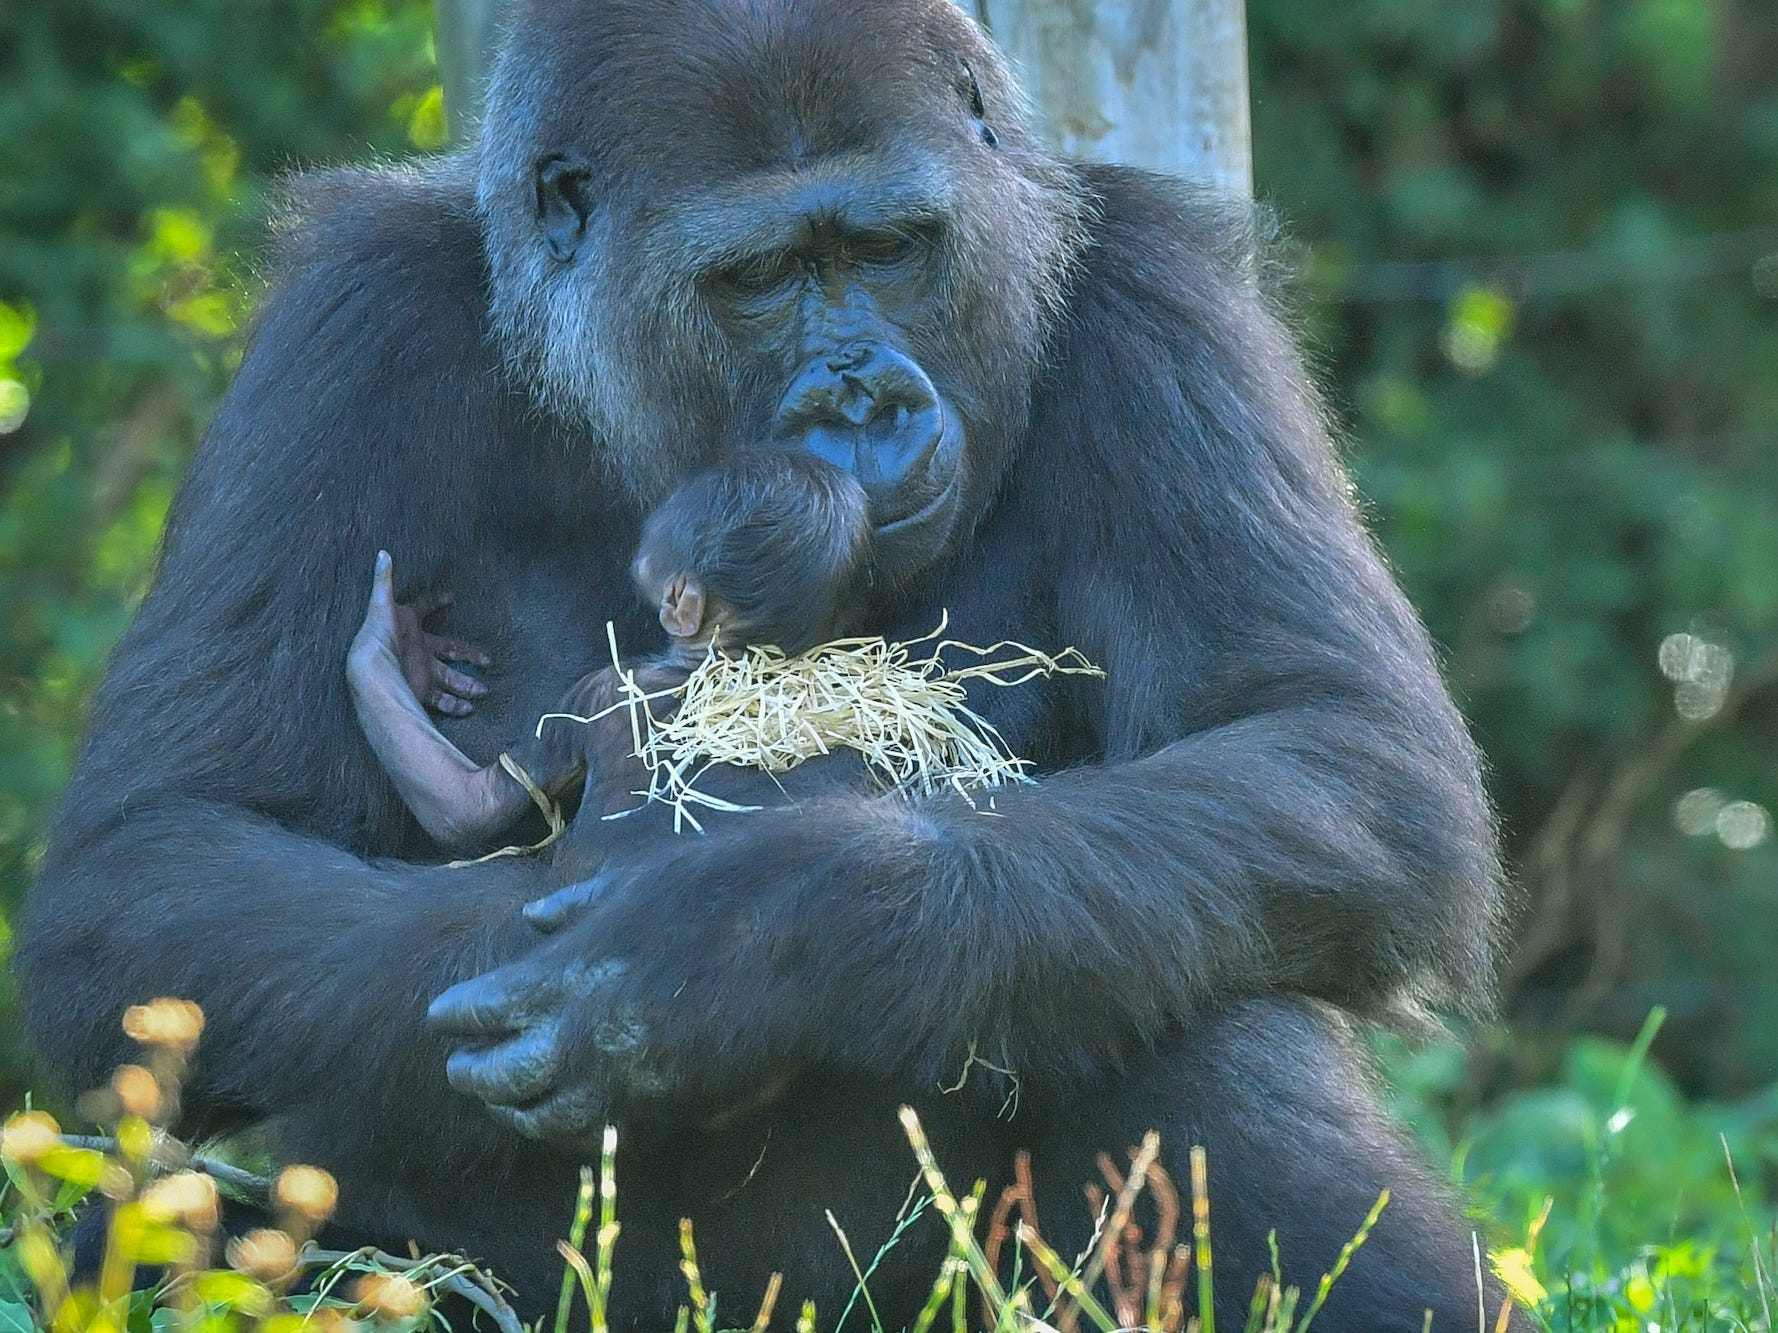 Gorilla moms carry their useless infants around with them, which will be proof that they grieve, scientists explain